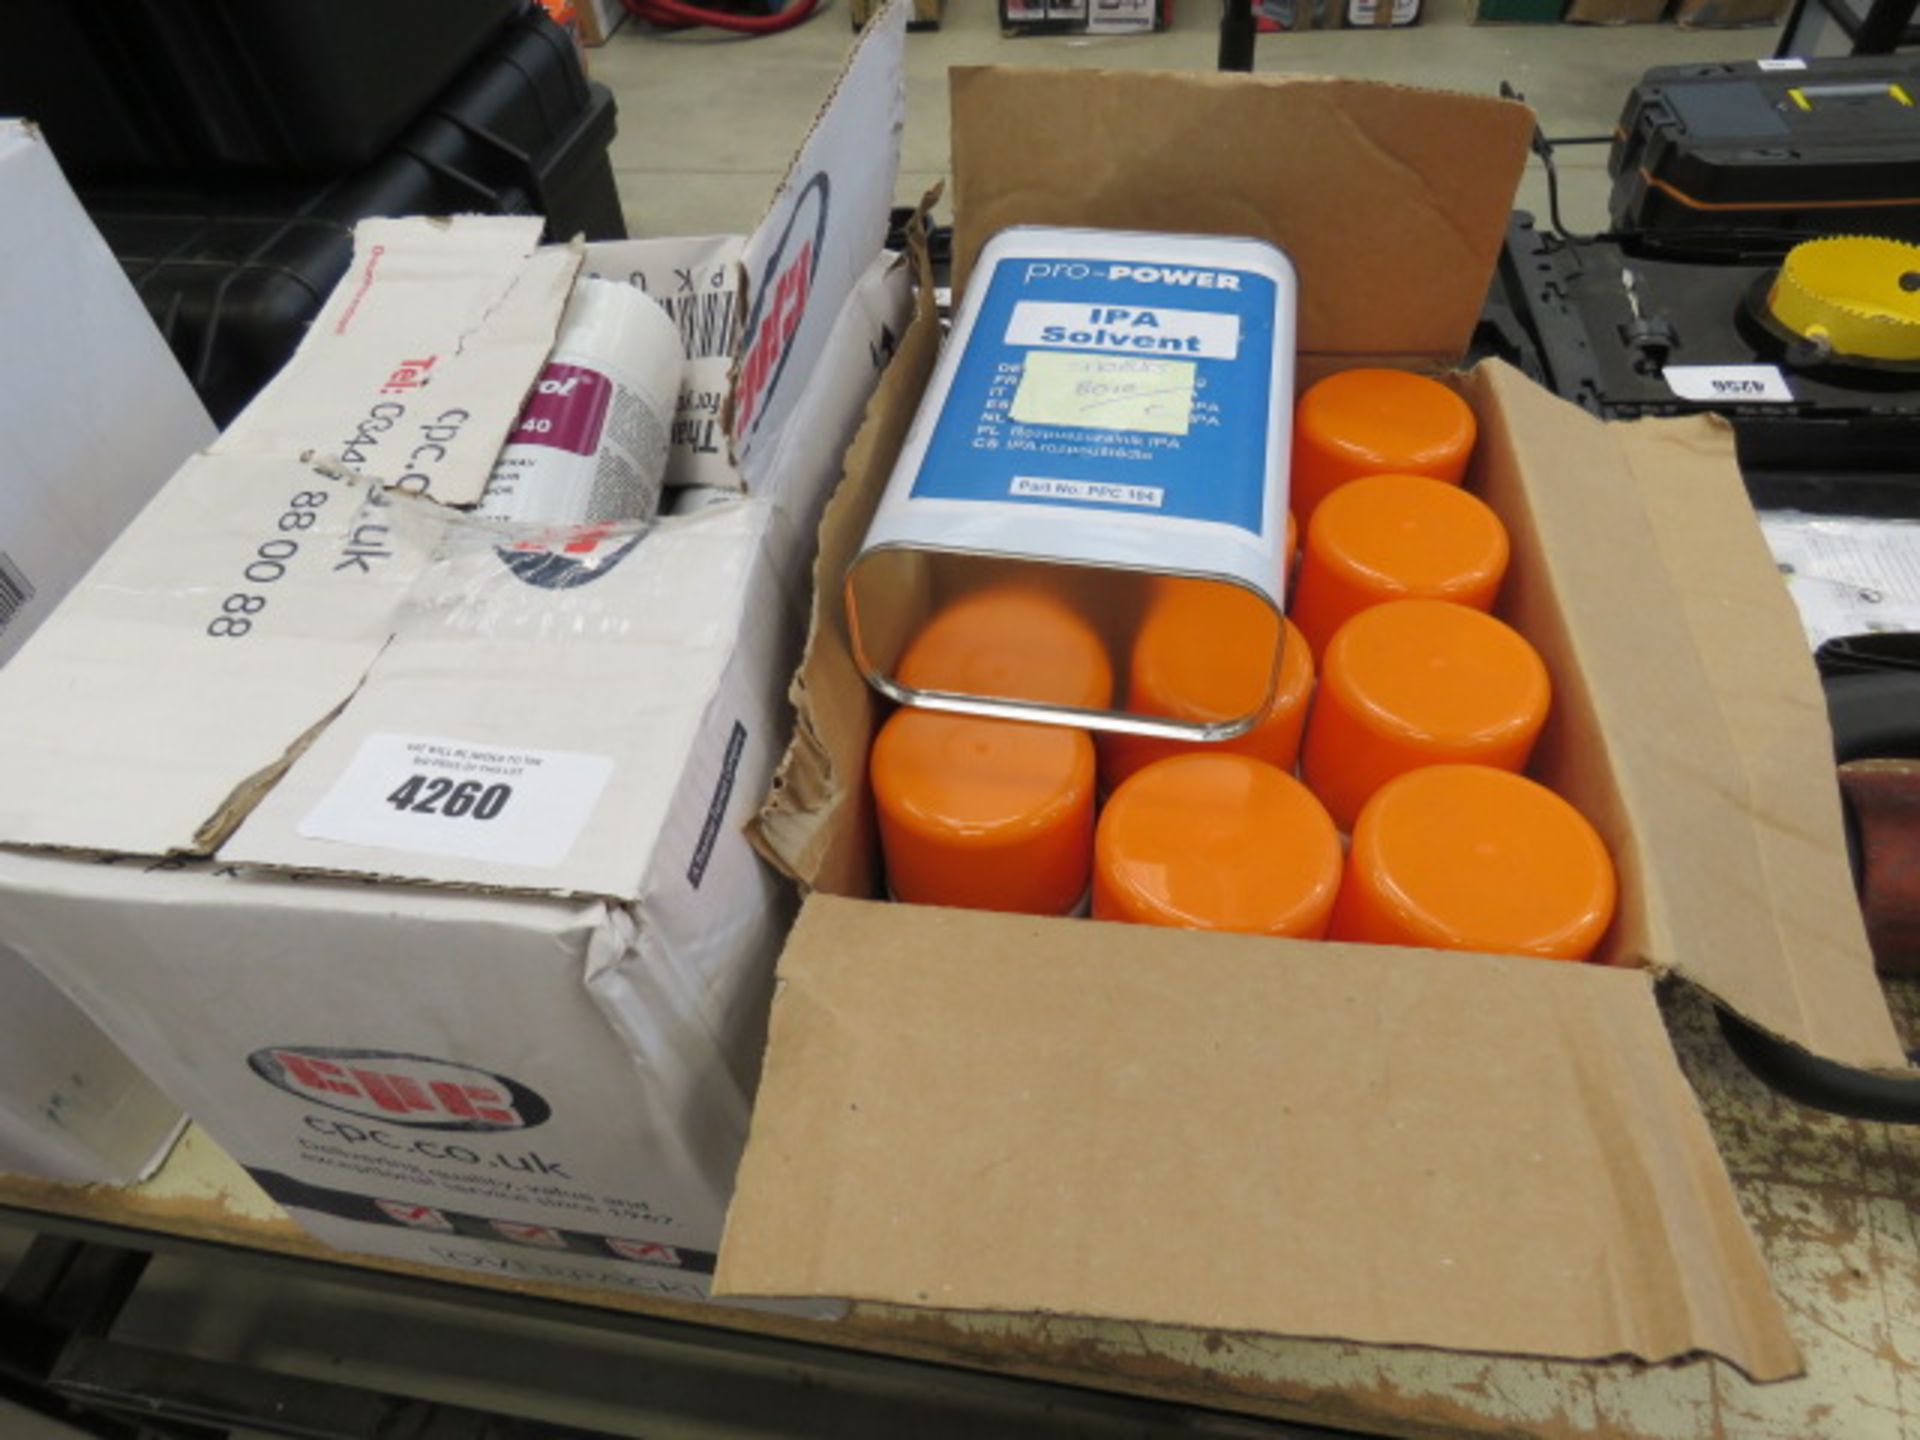 Box of renovator spray, solvent and box of fault detection spray